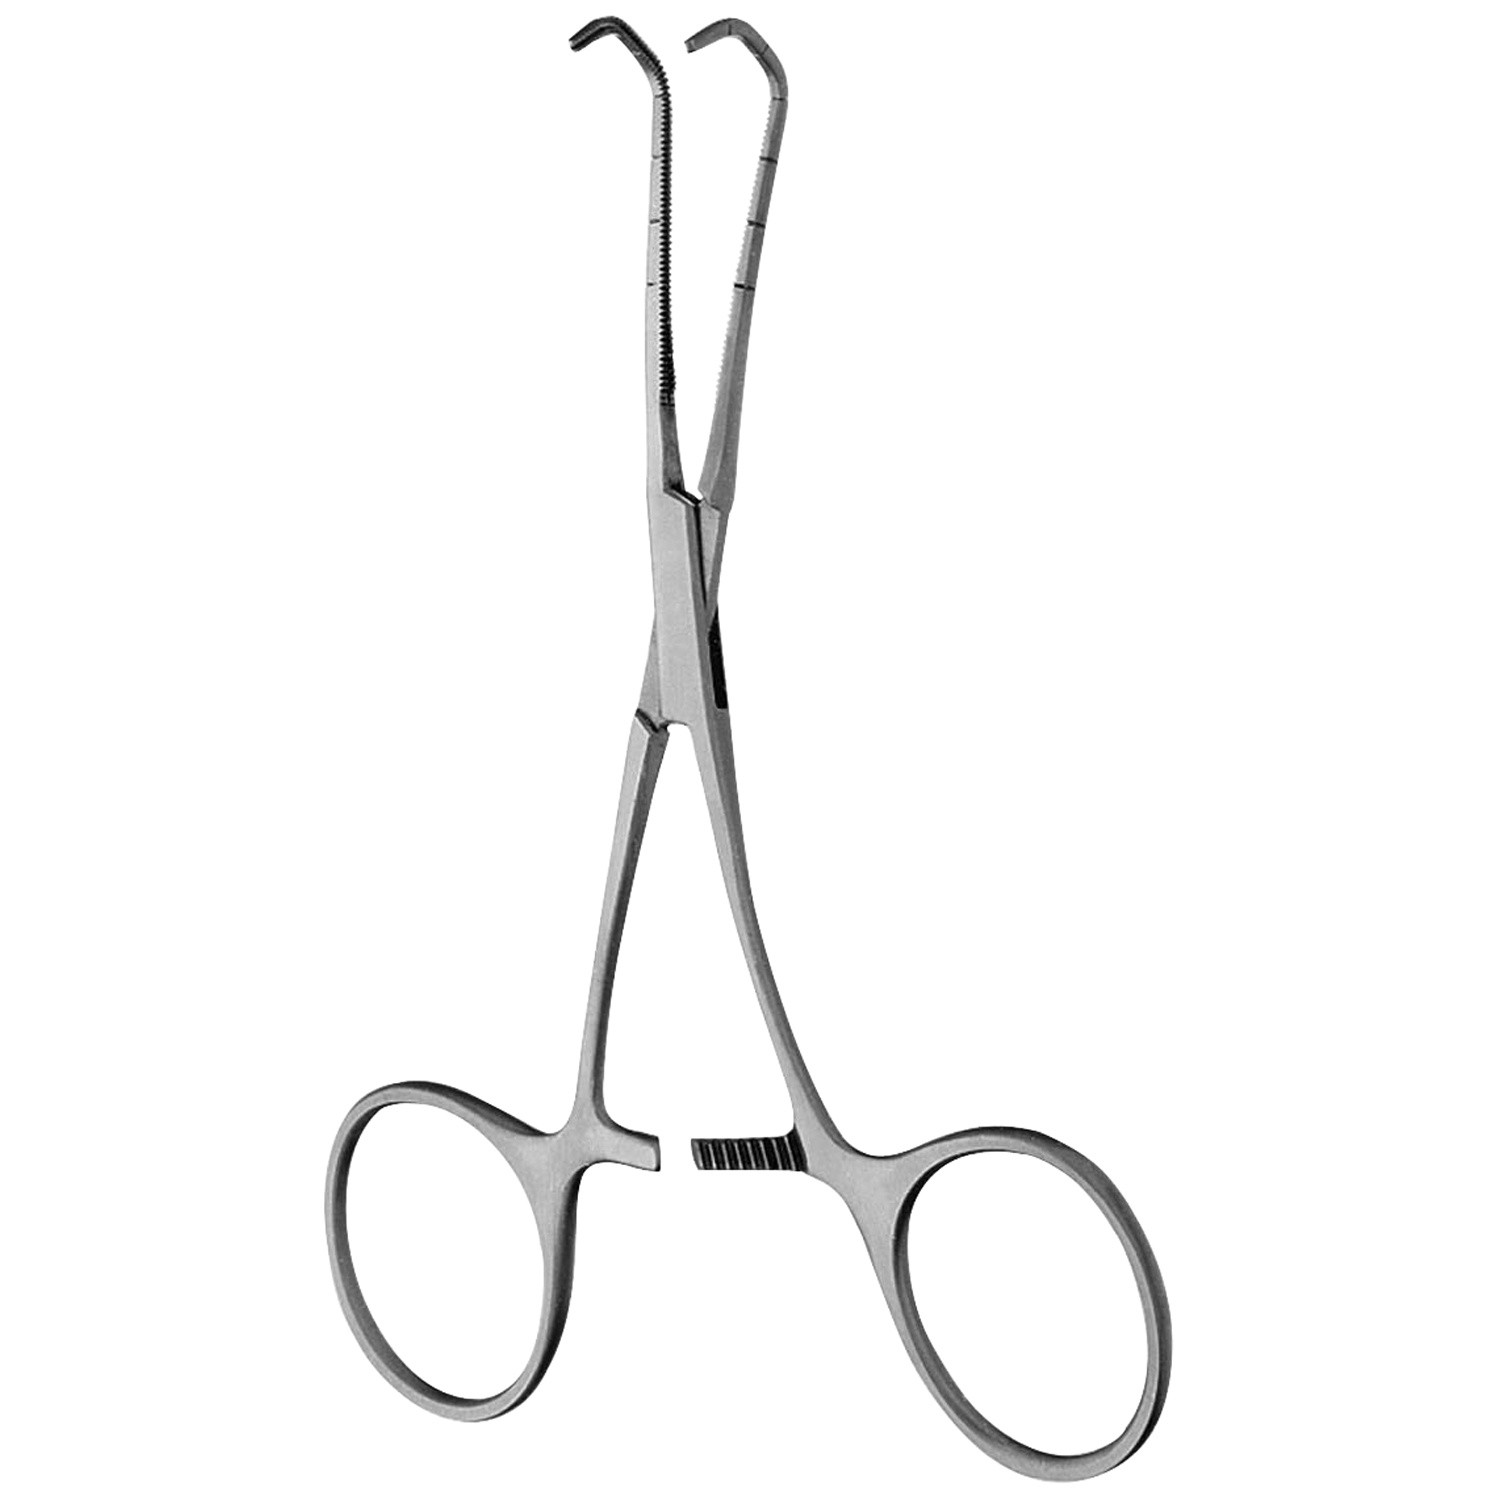 Cooley Vascular Clamp, Angled Shanks, Jaws Calibrated At 5.0 Mm Intervals, 6 1/2" (16.5 Cm), 90 Degree Angle, Small Jaws